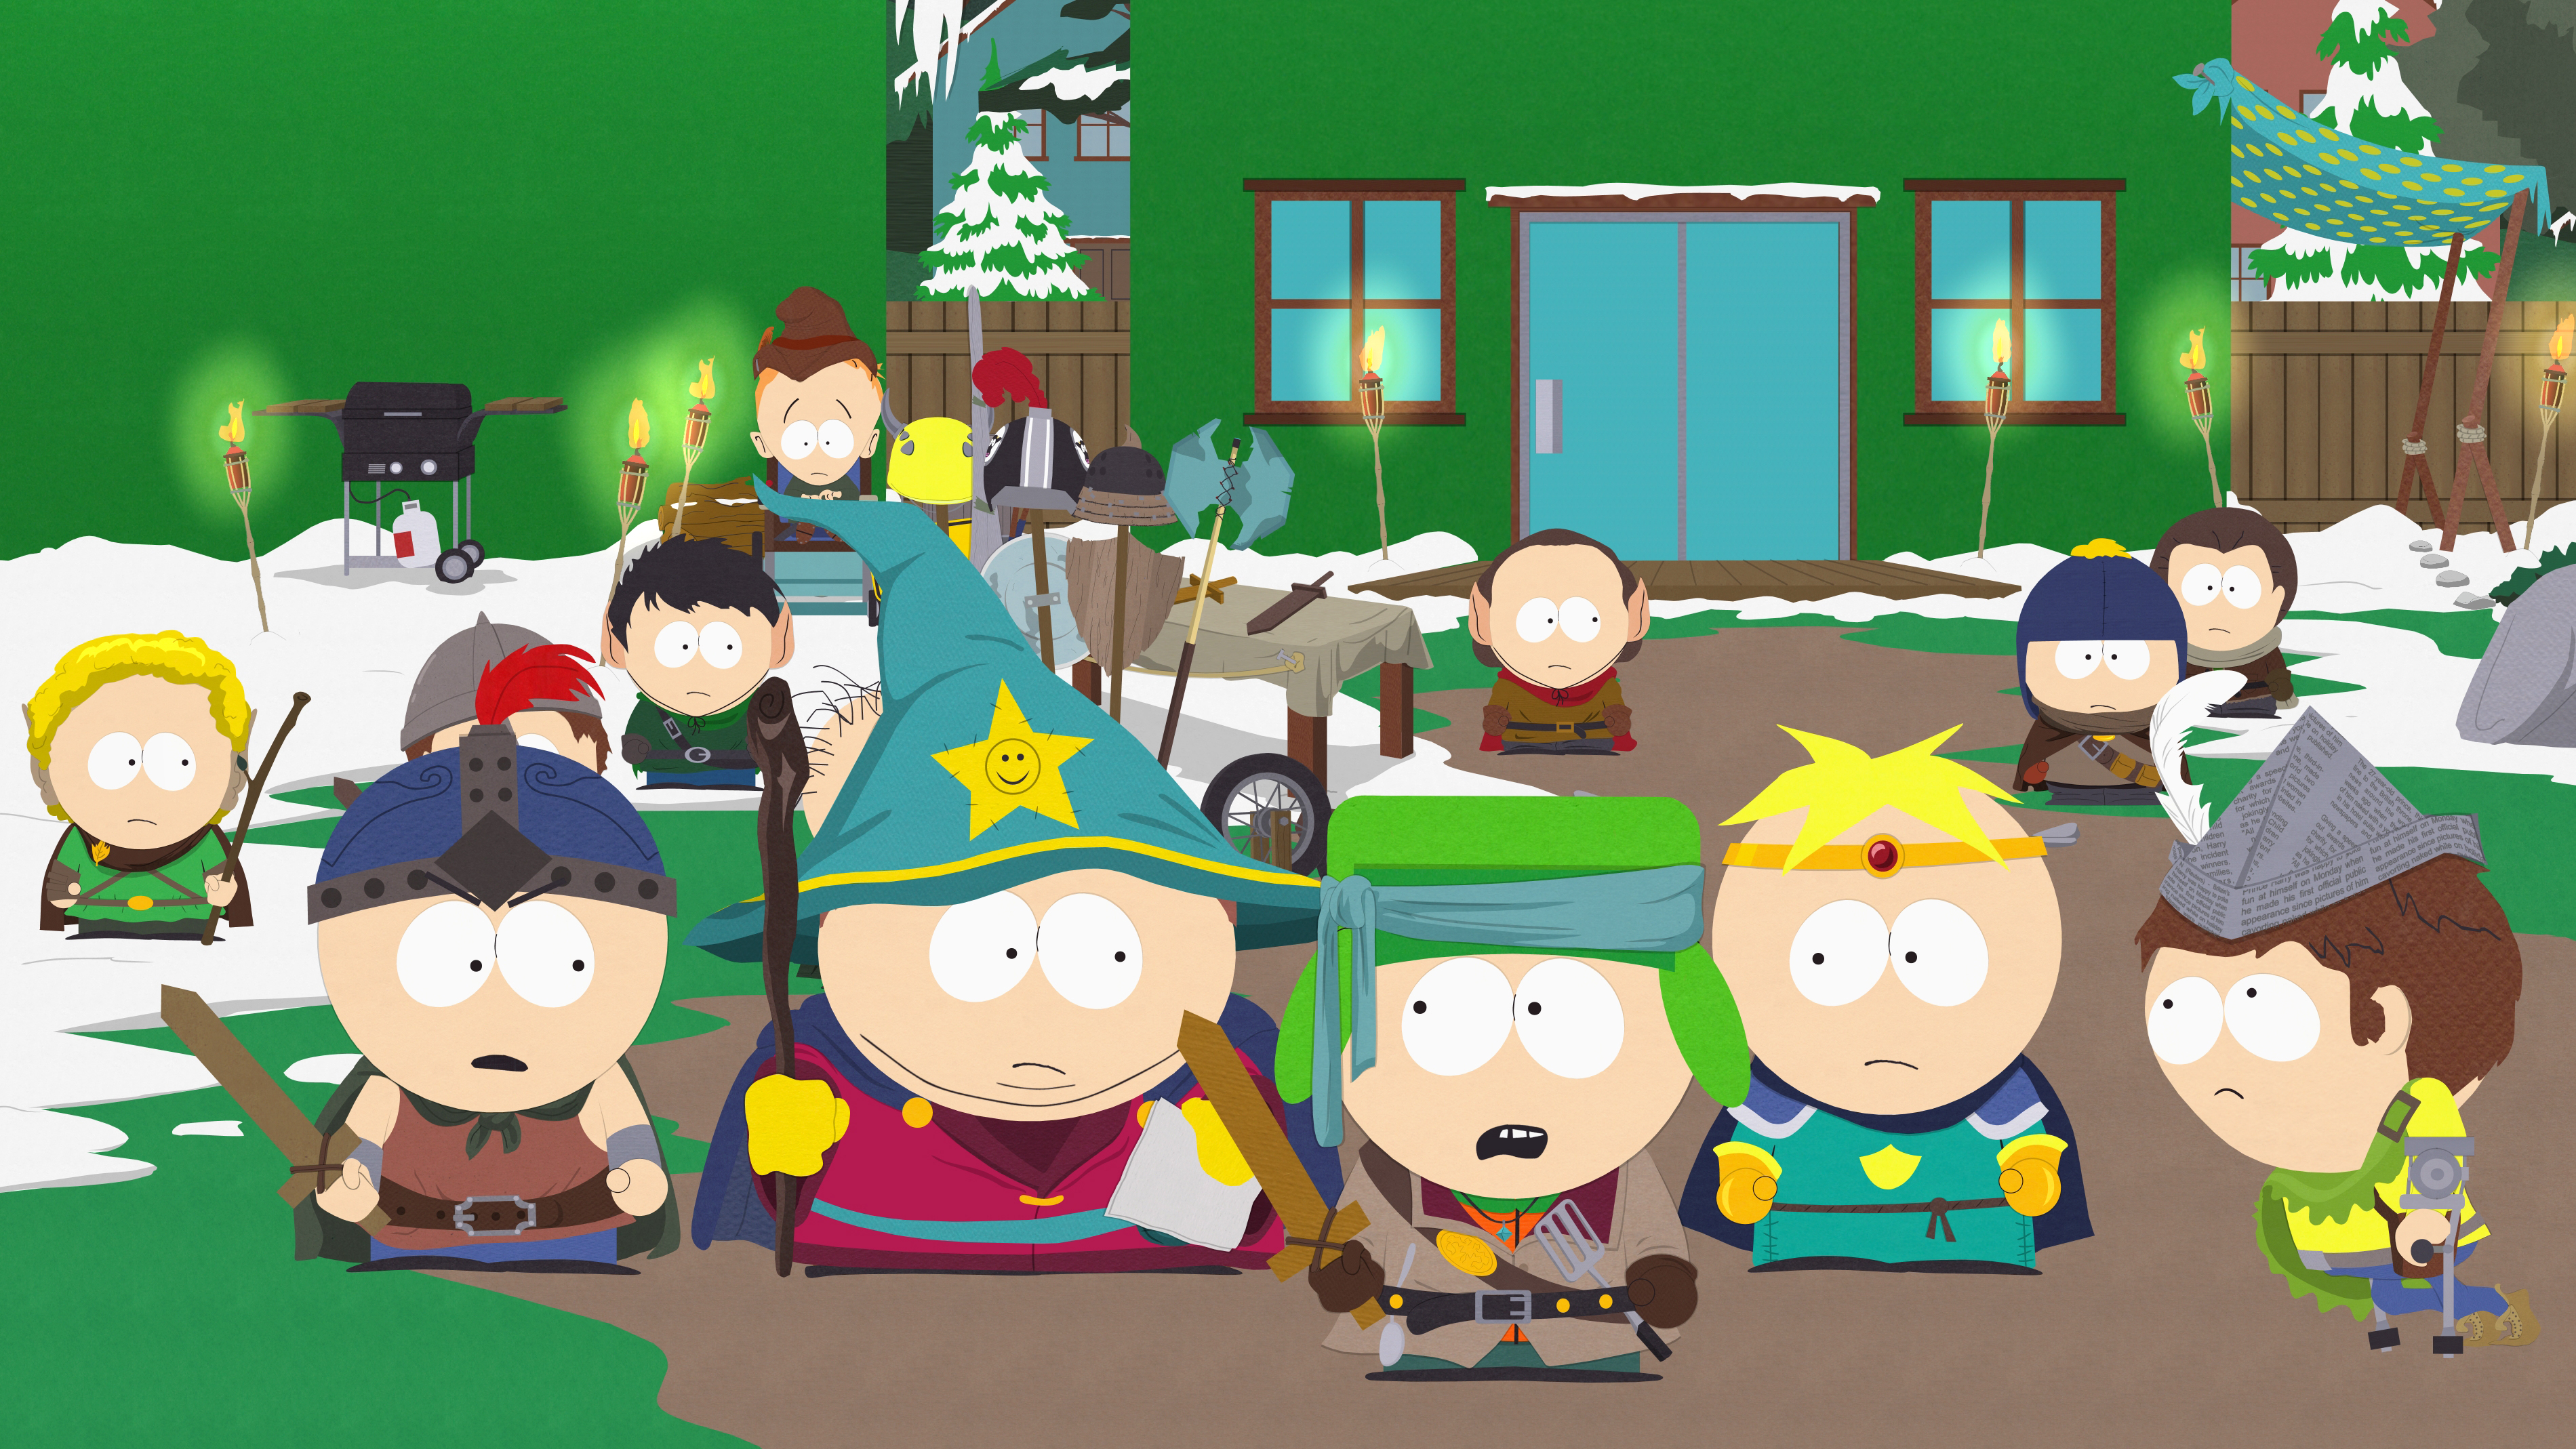  XBOX One vs PS4 South Park Game of Thrones Style